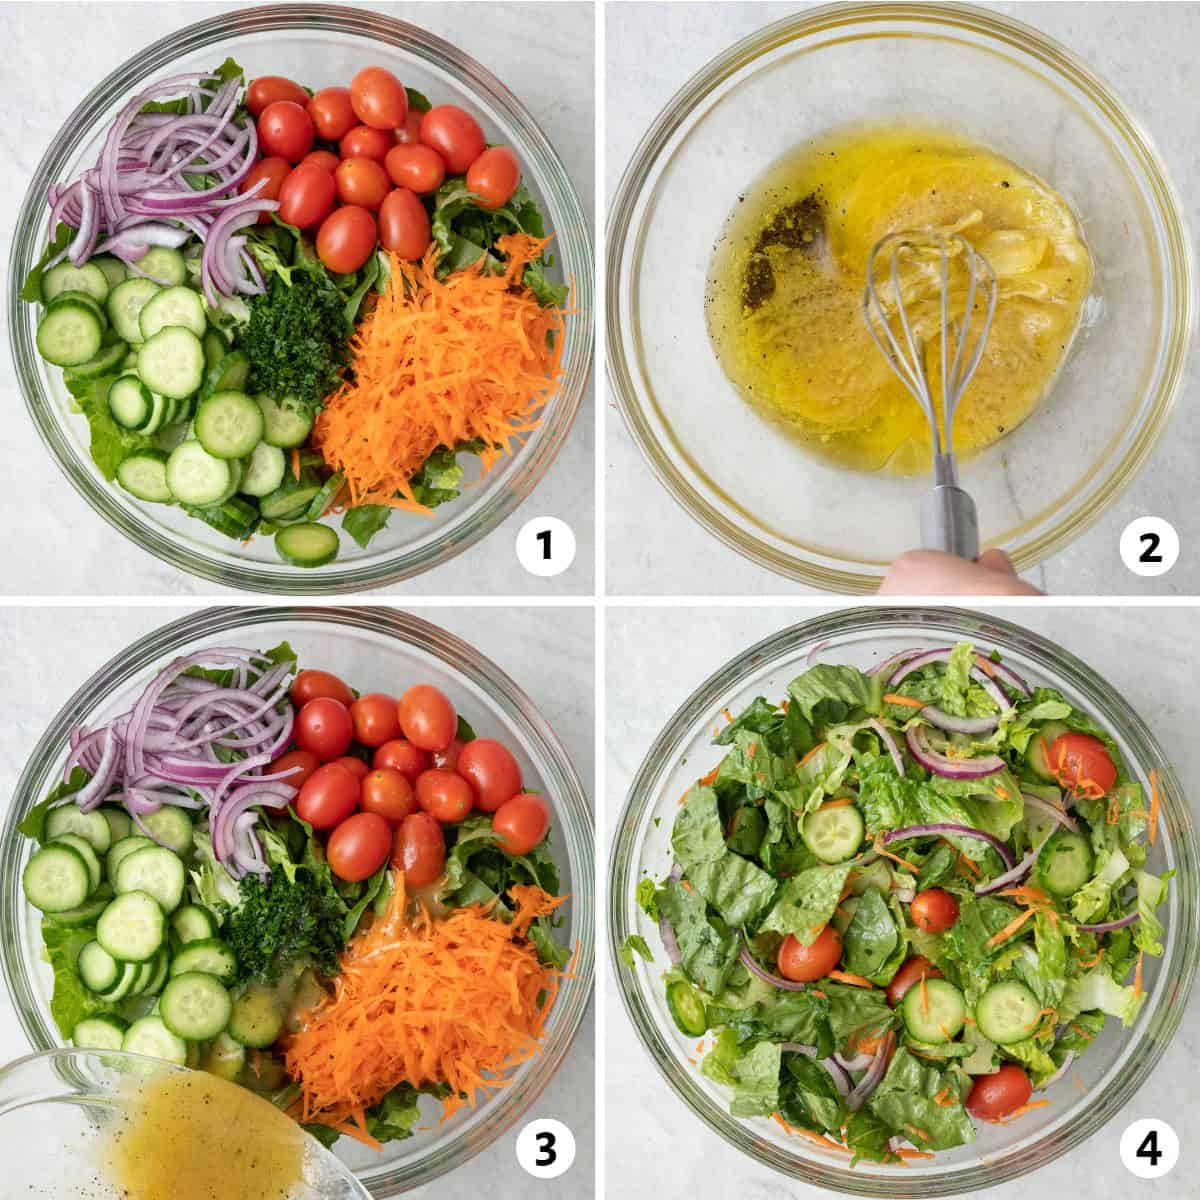 4 image collage making recipe: 1- salad ingredients in bowl before tossing, 2- dressing ingredients being whisked, 3- dressing being poured over salad, 4- salad after tossed.